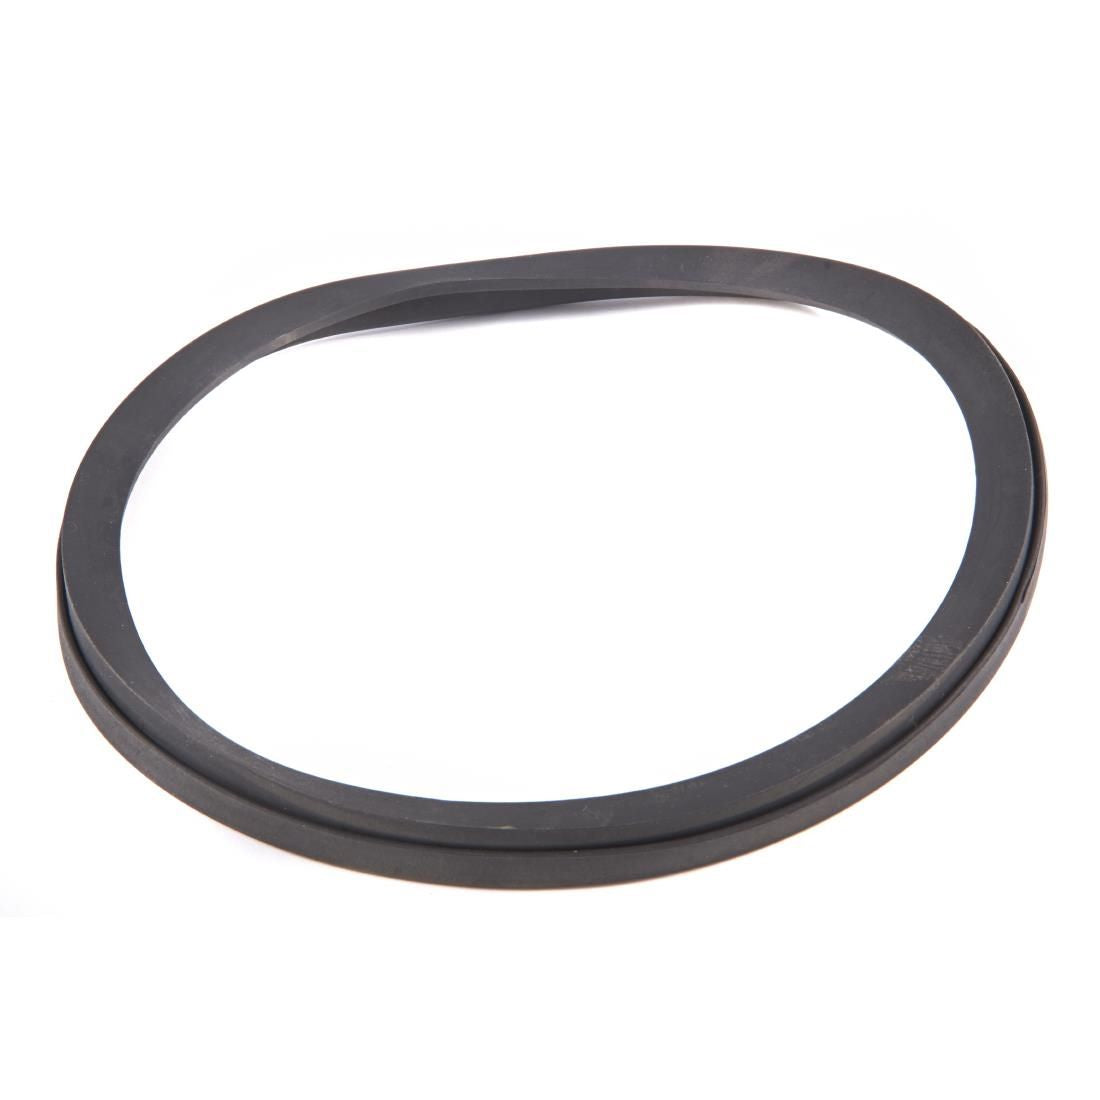 WA199 Gasket for ST/ST Outer Lid